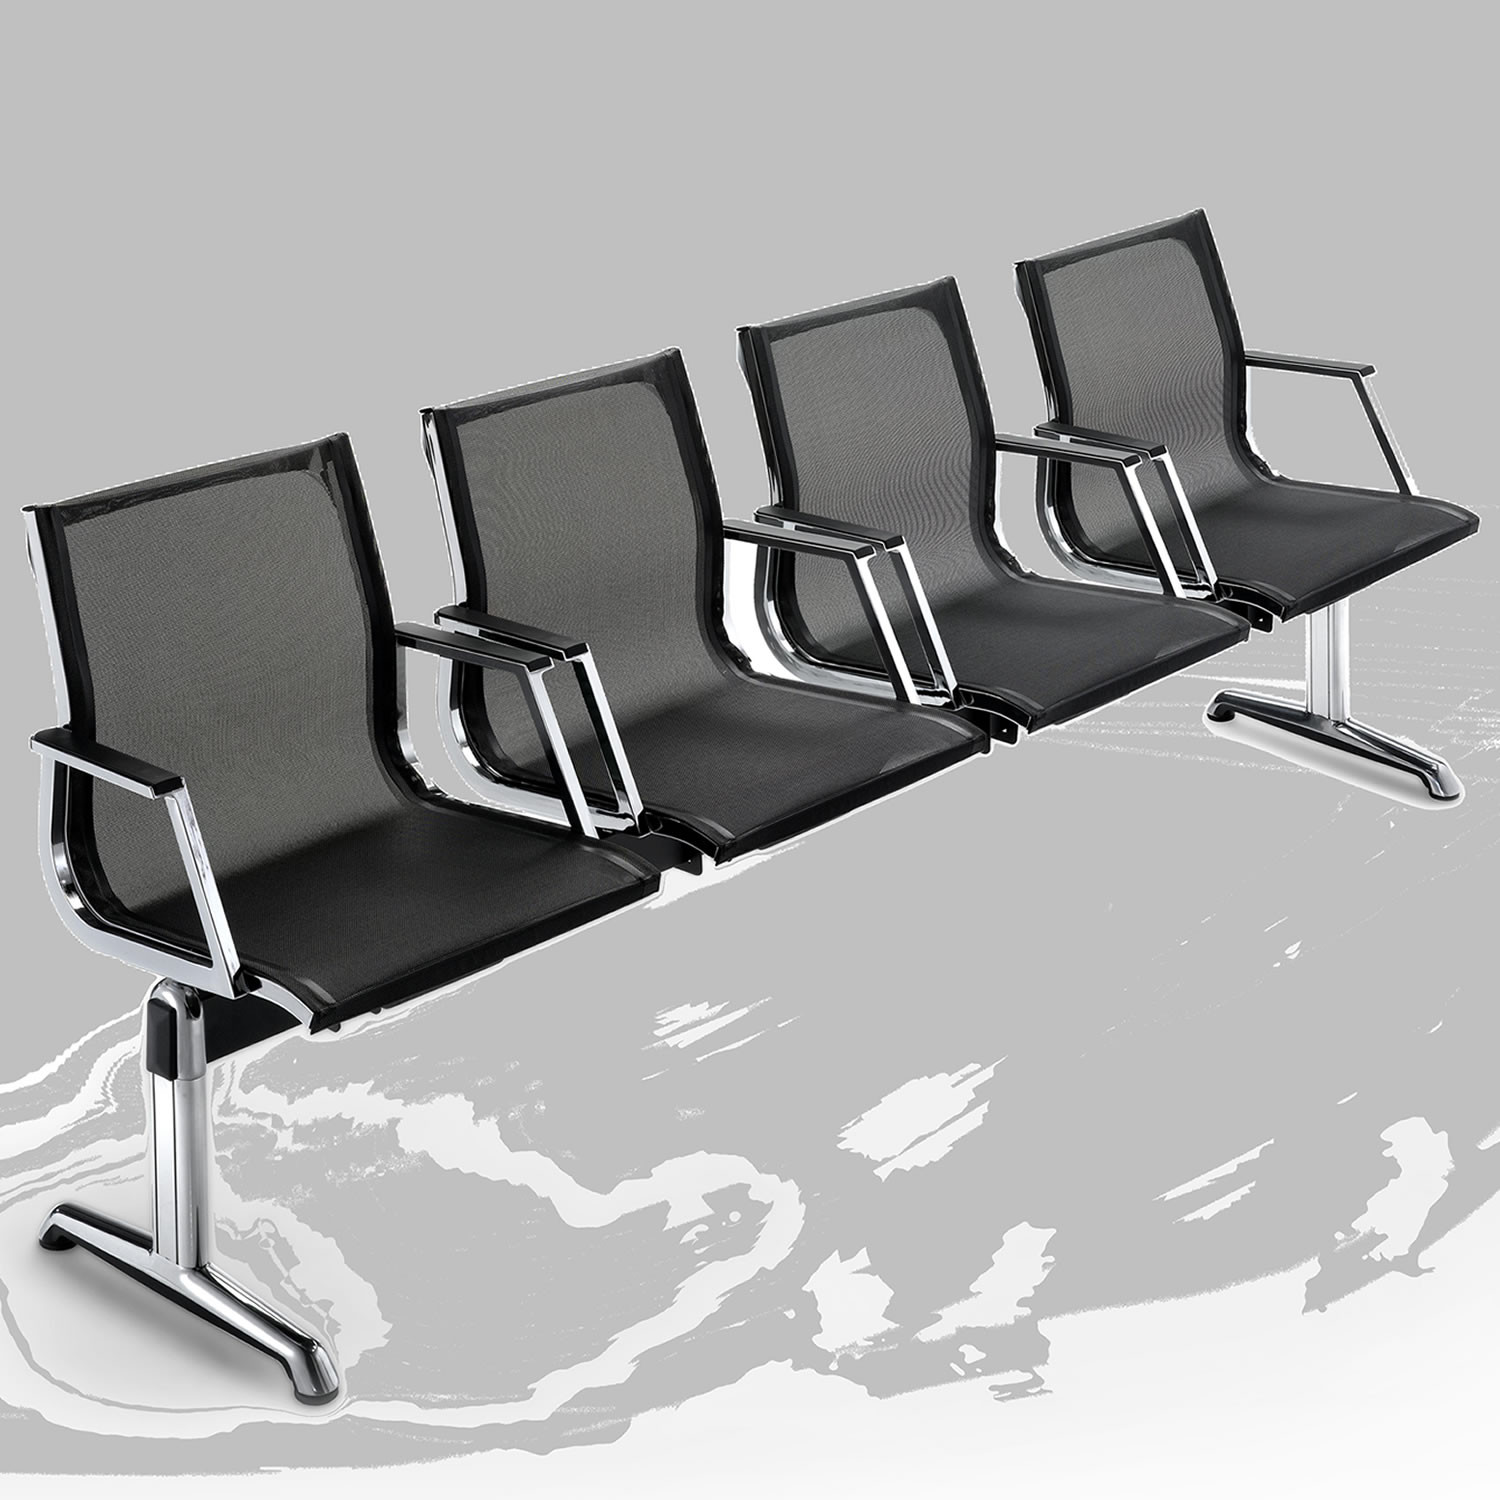 Nulite Modular Seating System with armrests